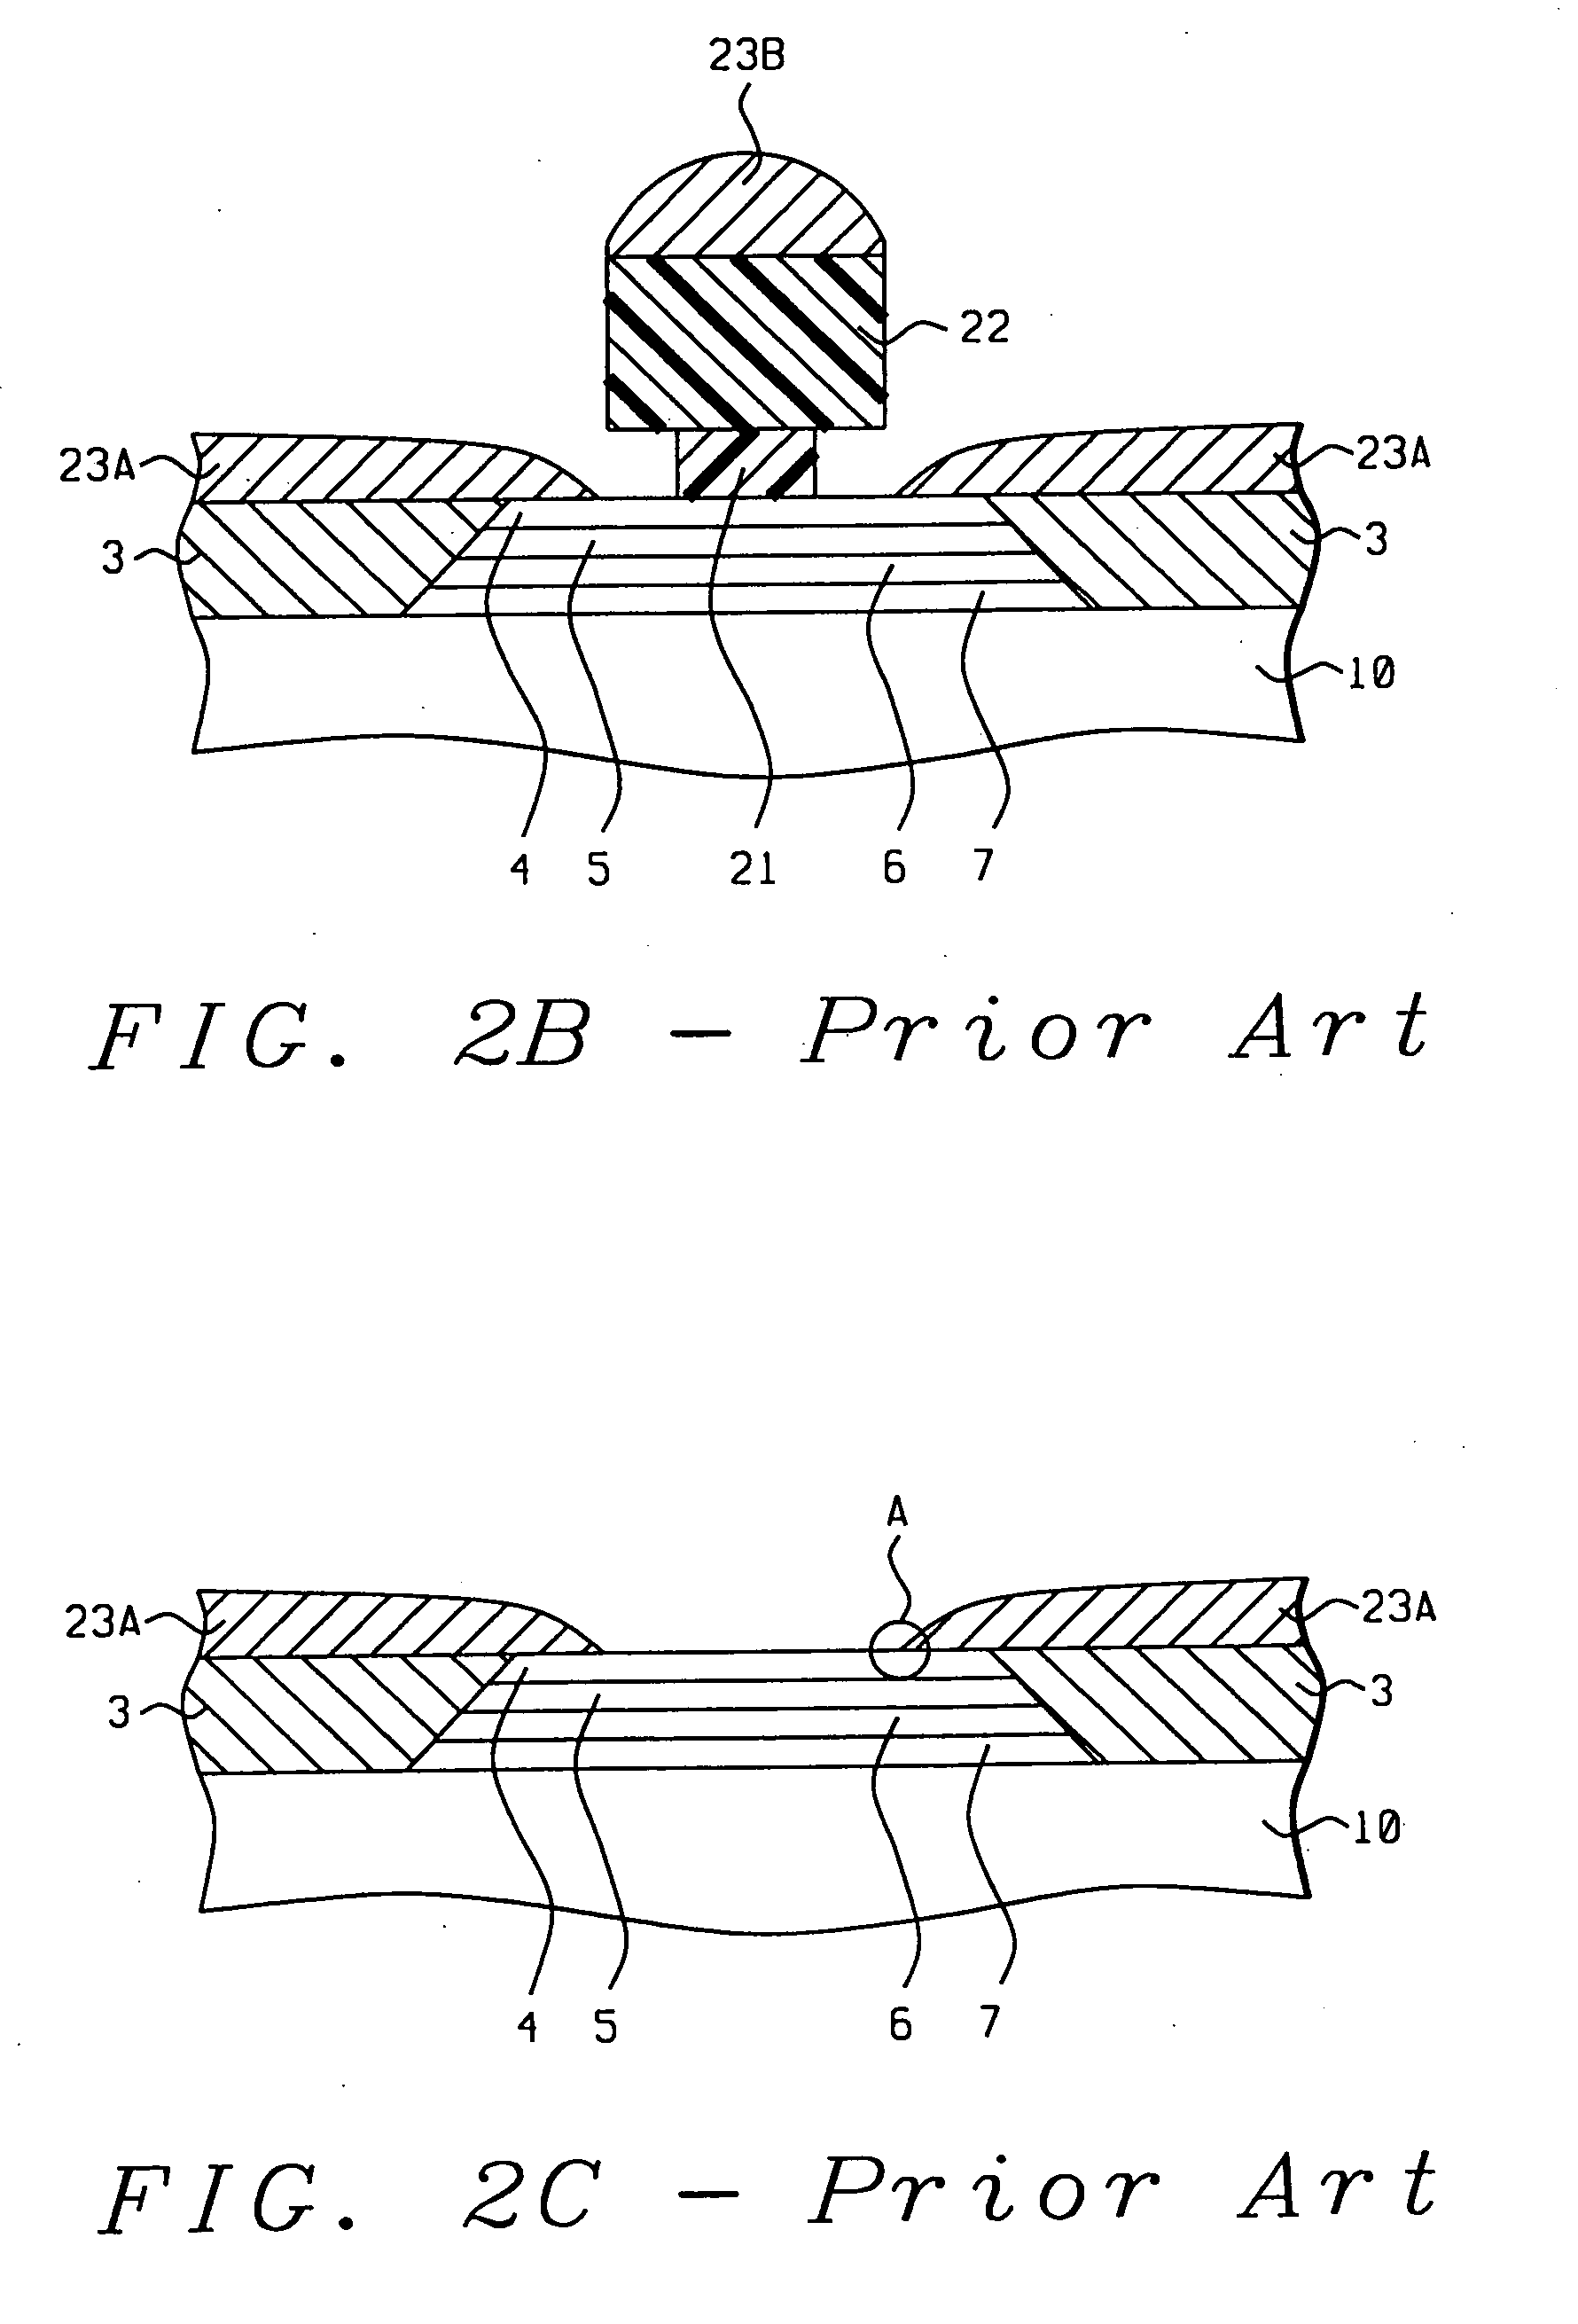 Lead plating method for GMR head manufacture